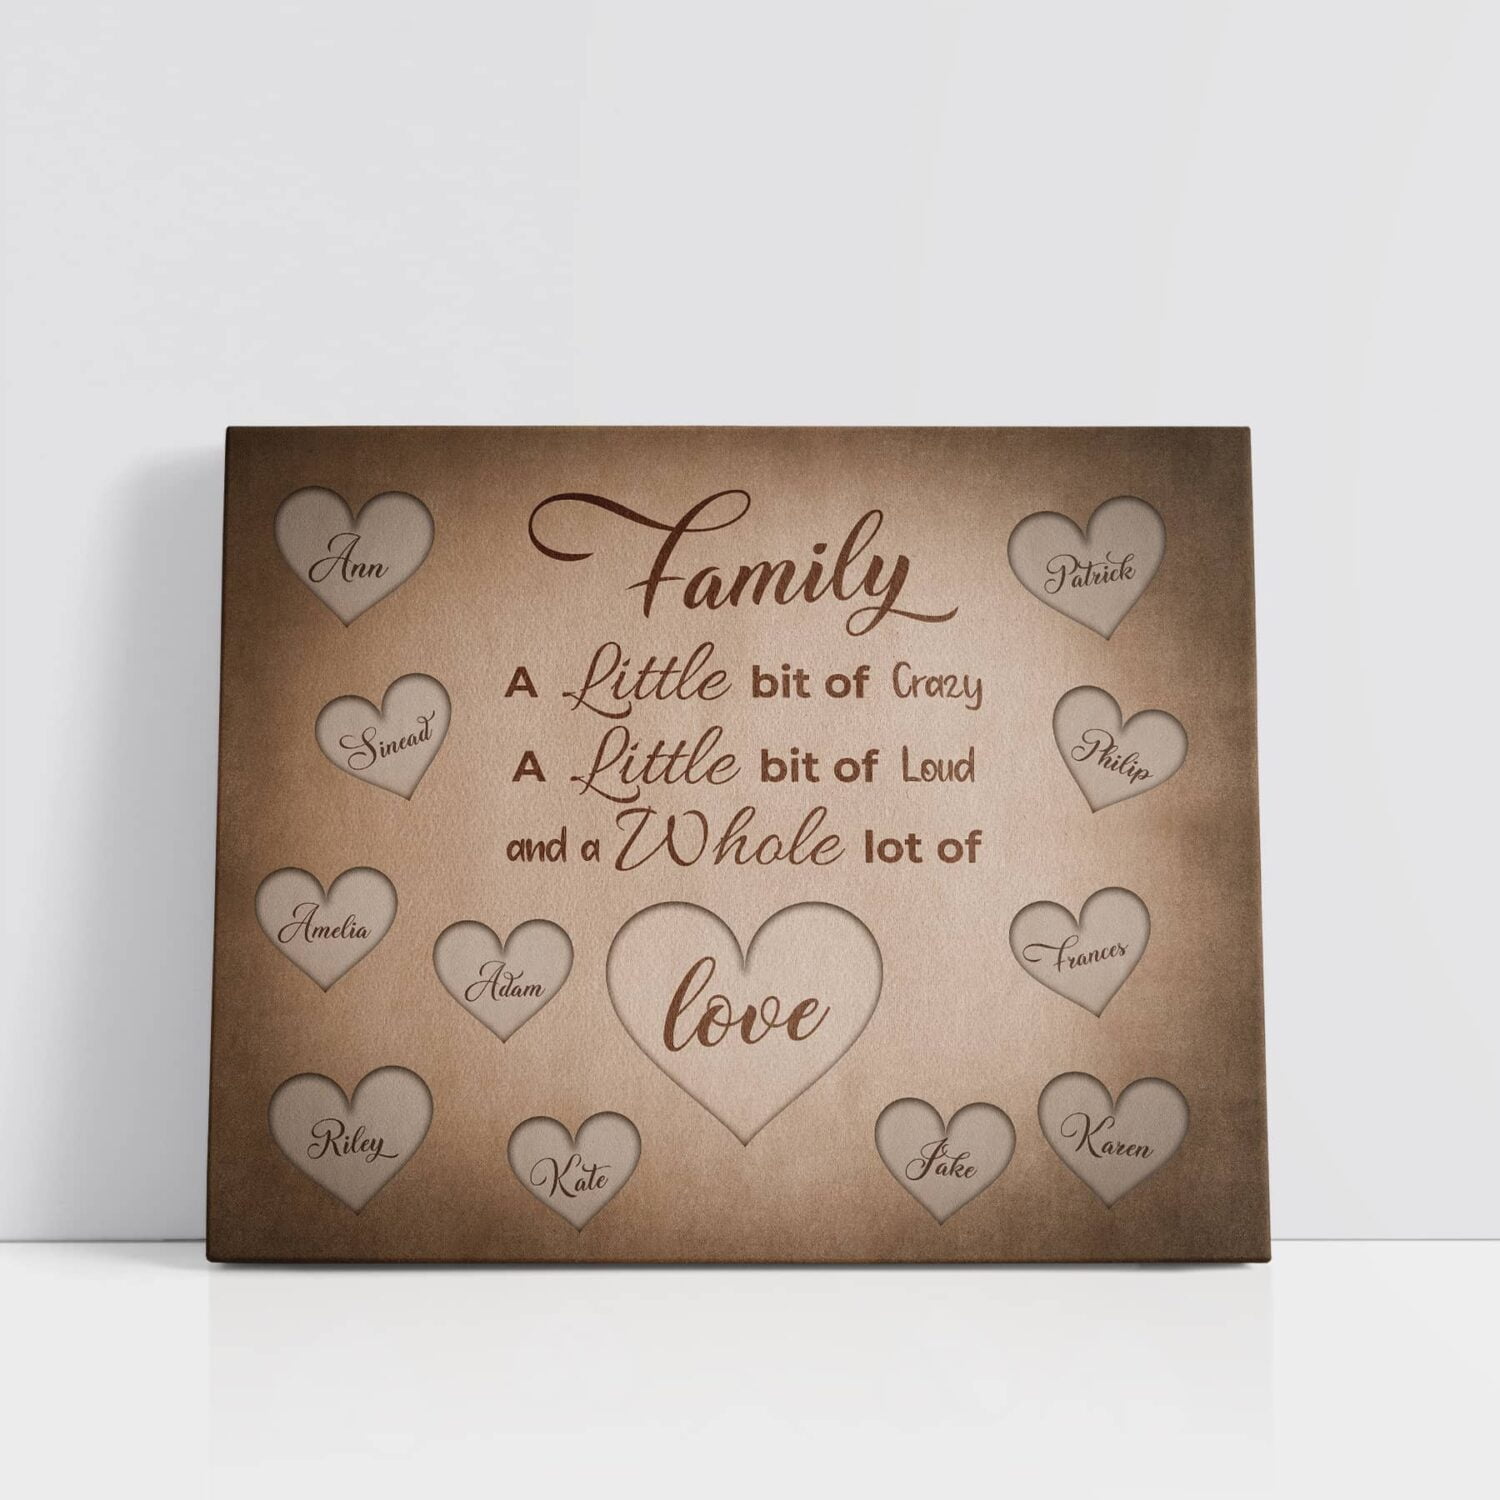 A Whole lot of Love is a personalised family canvas that features each family members name.